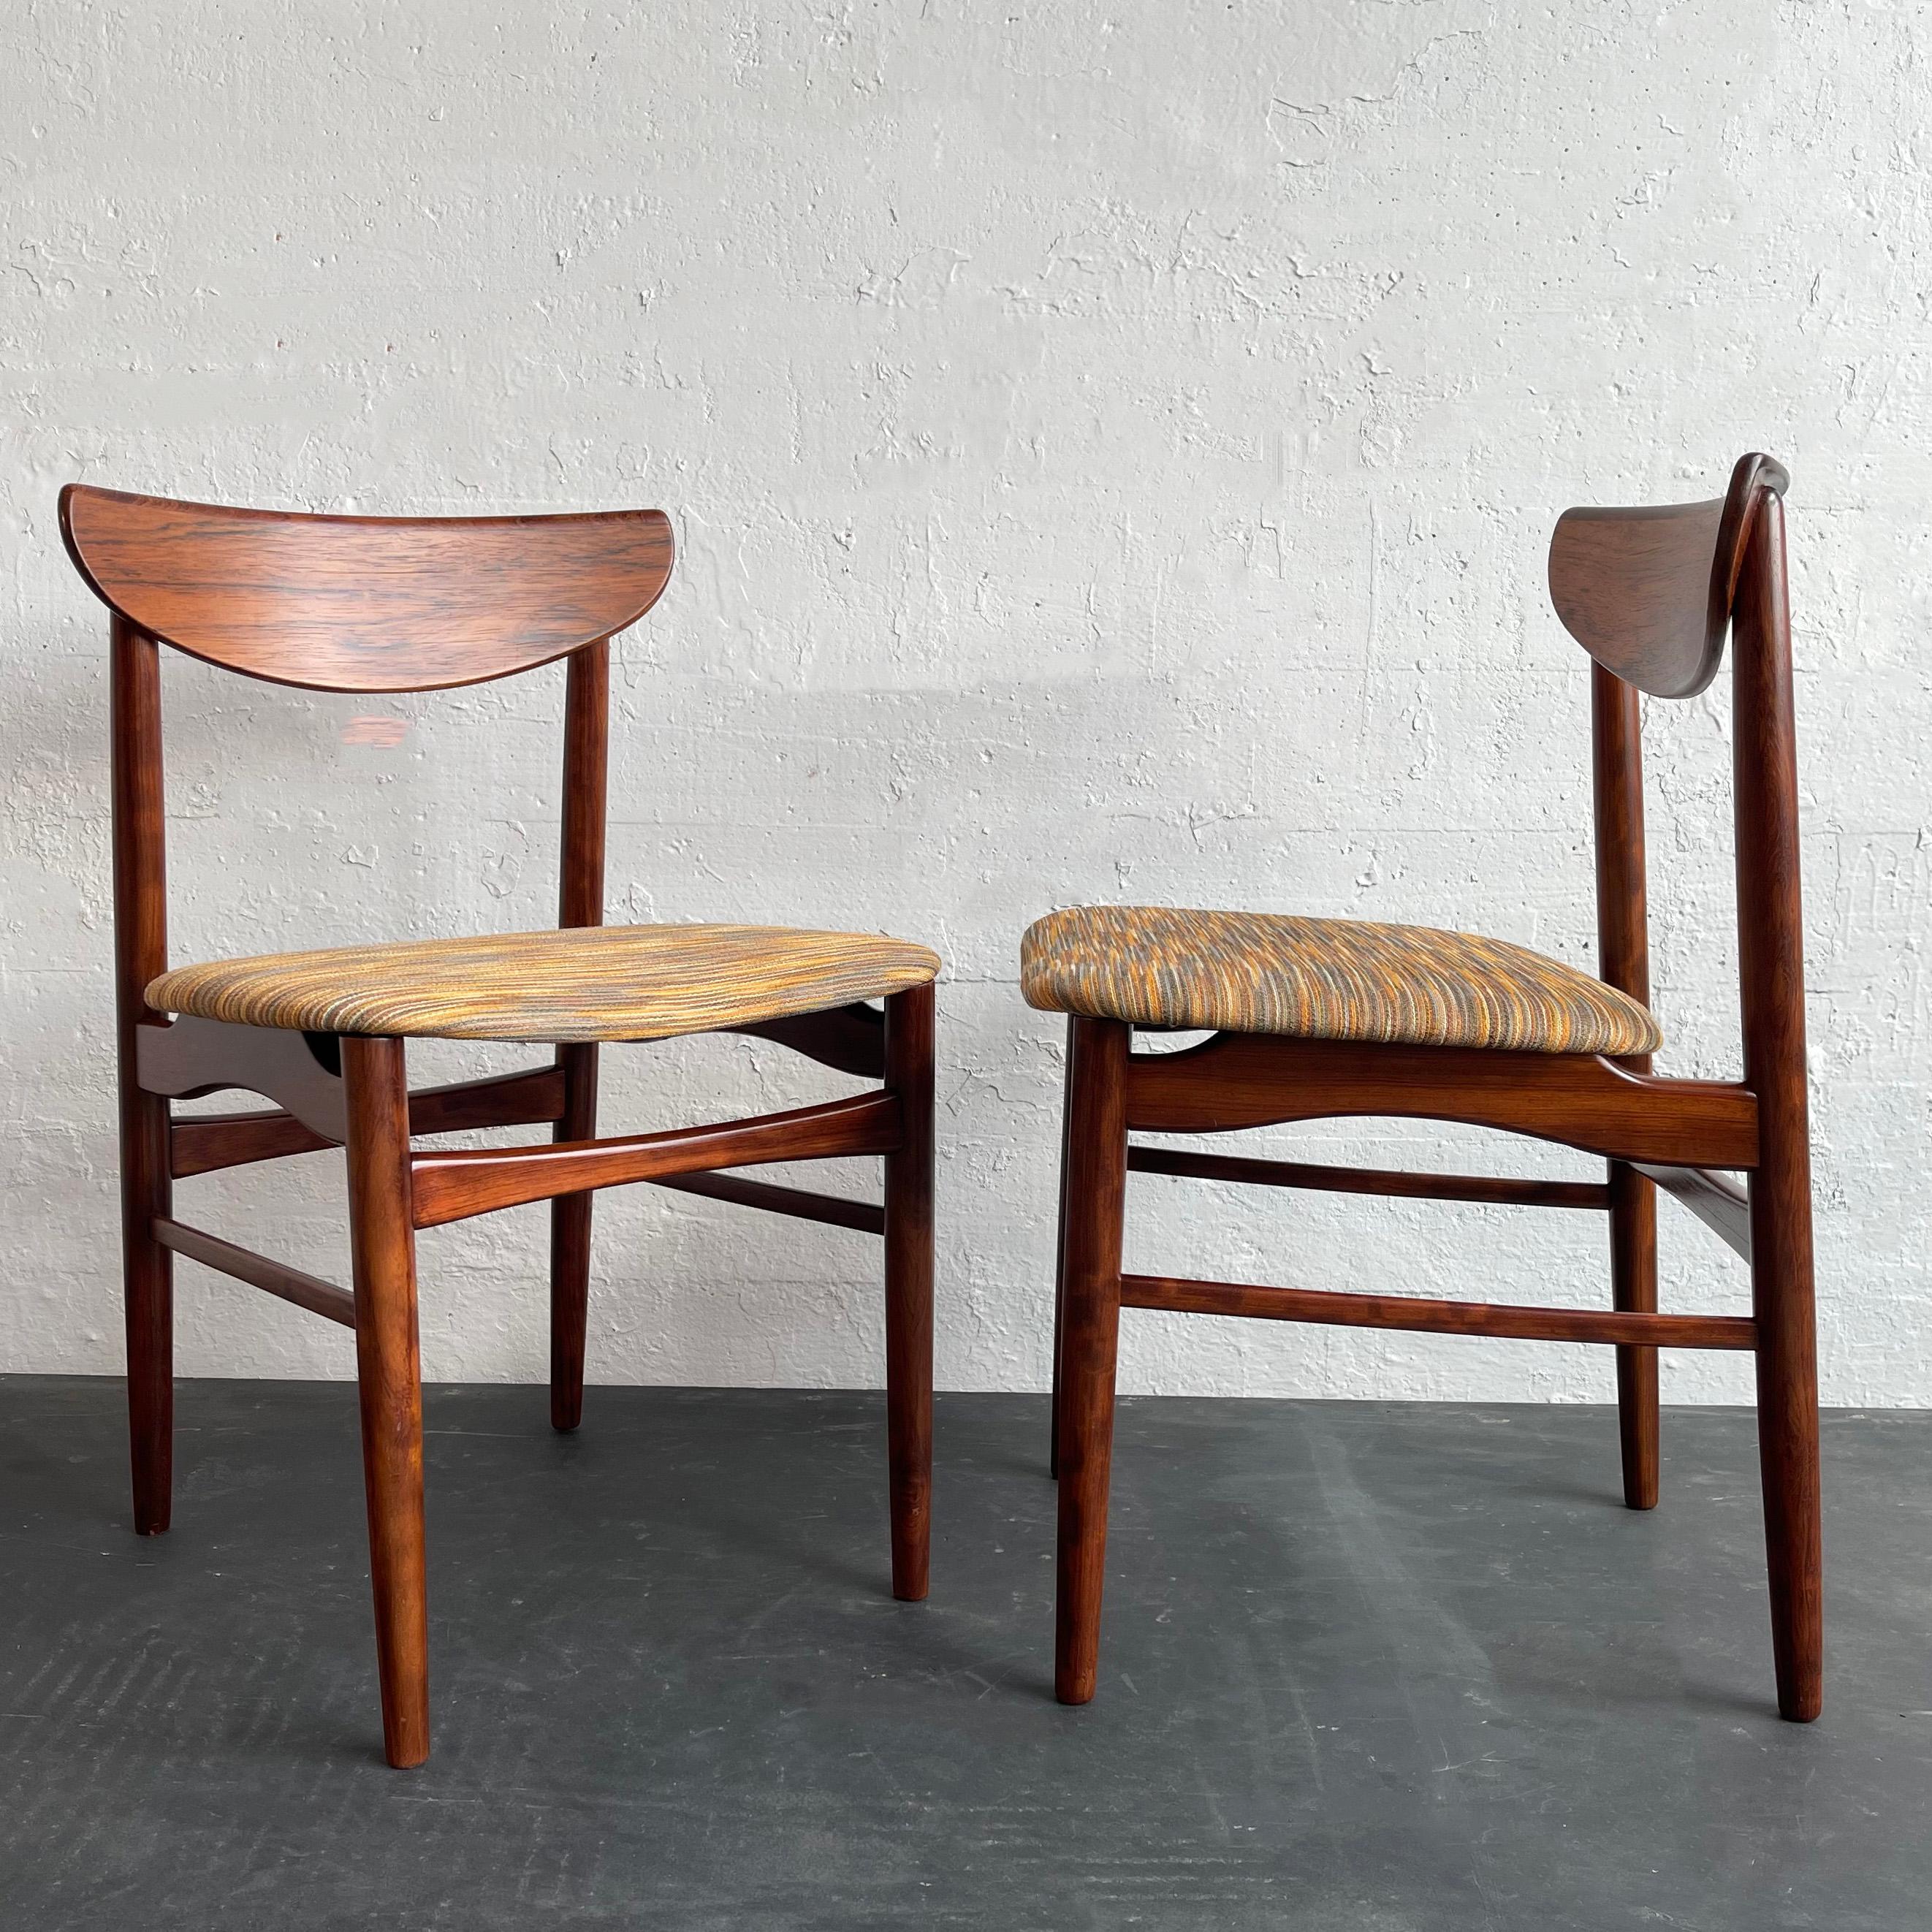 Danish Modern Rosewood Dining Chairs By Kurt Østervig For K.P. Møbler For Sale 1